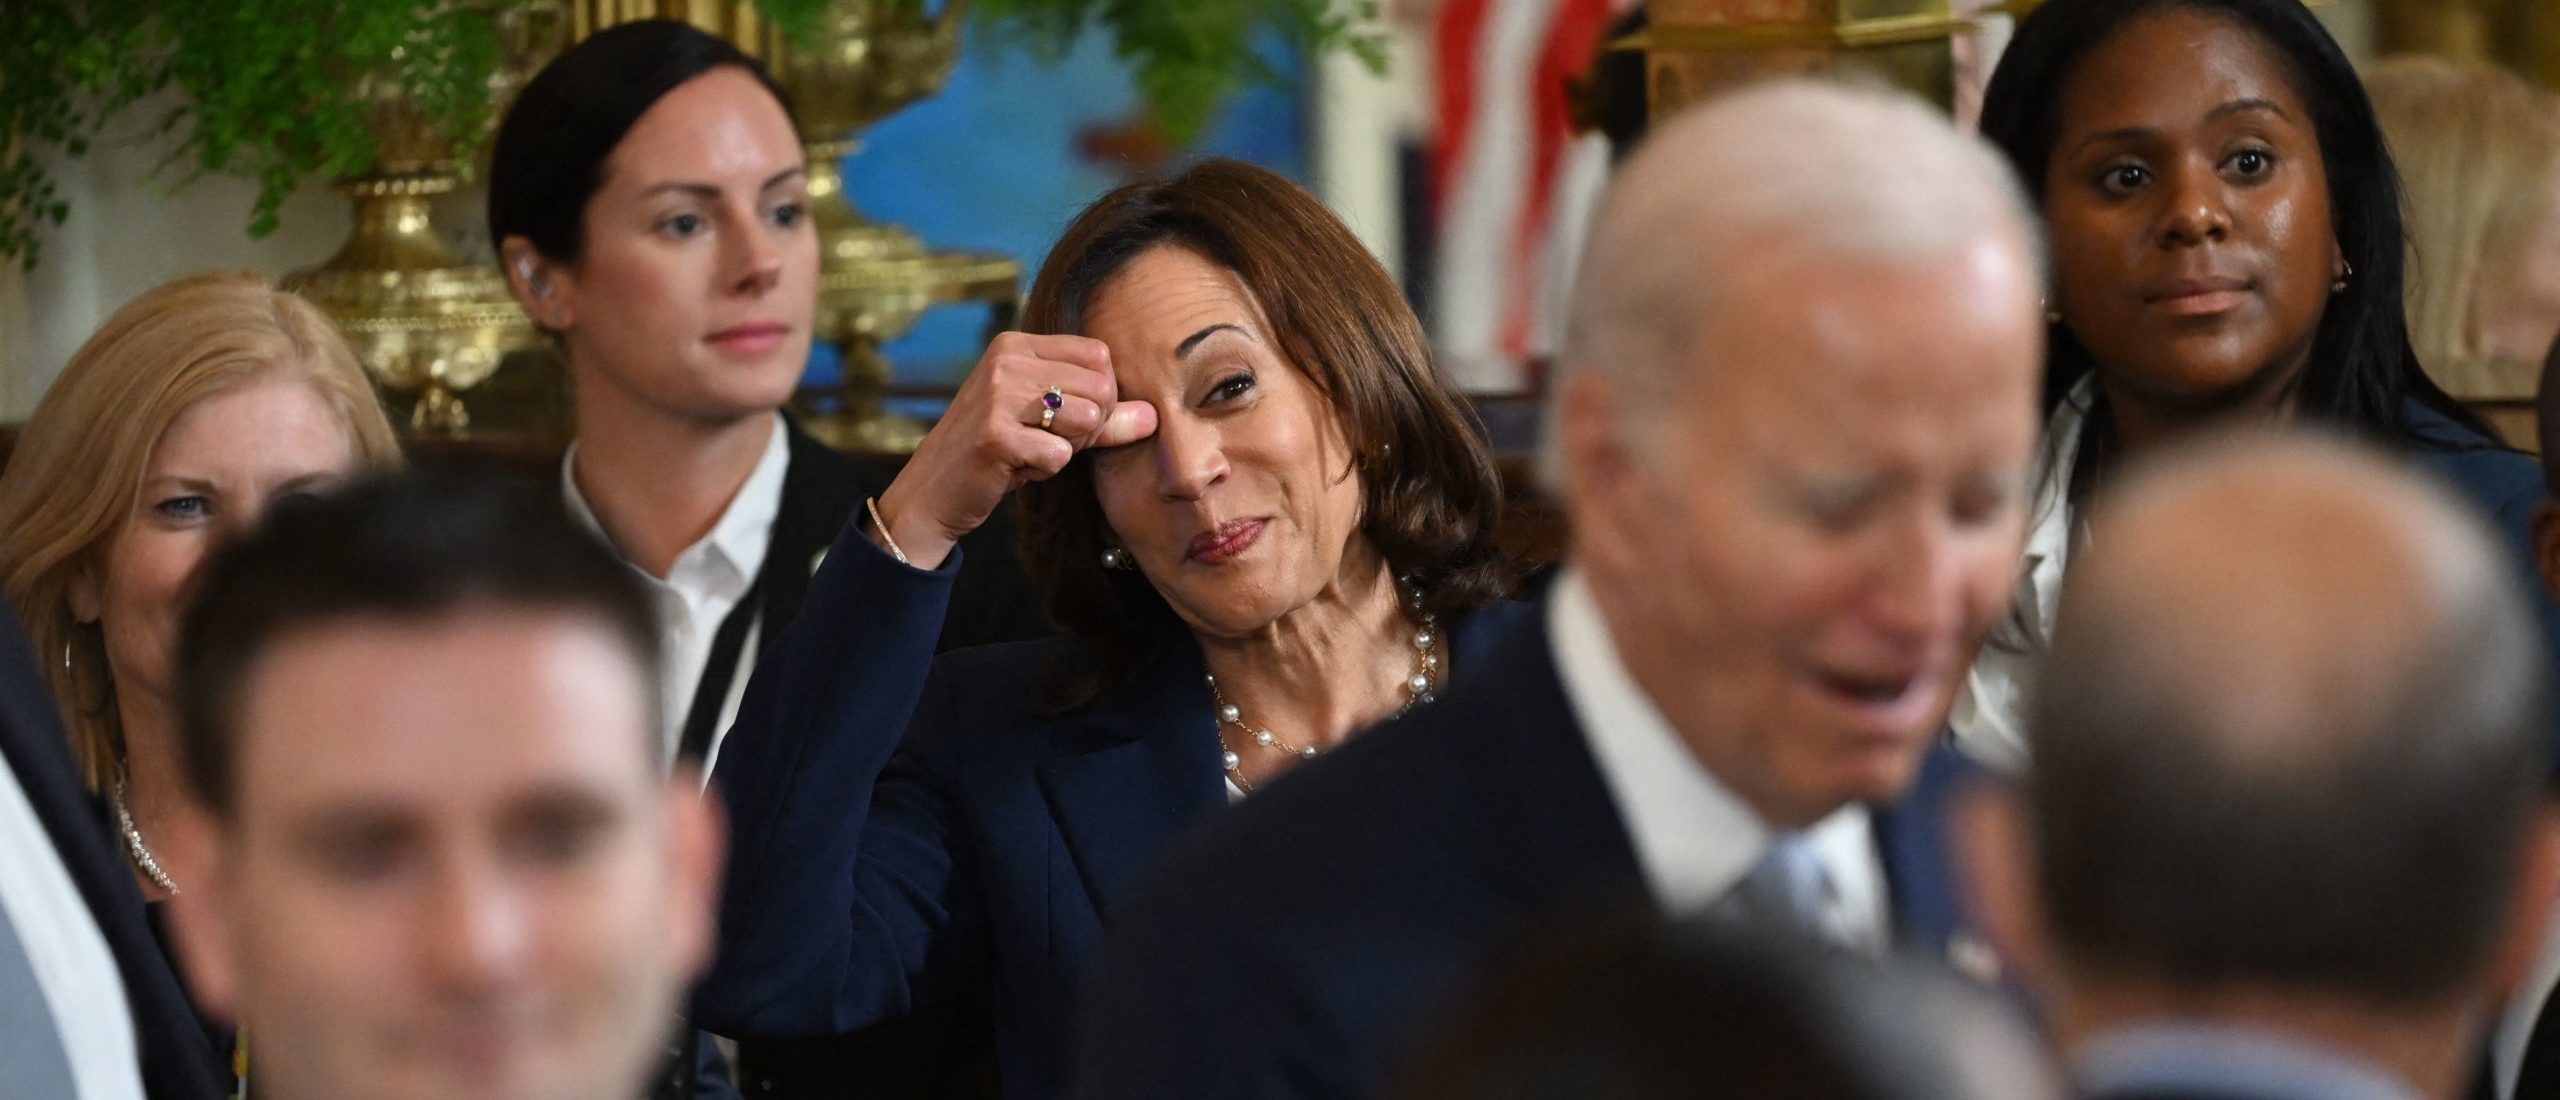 New Biden Election Conspiracy Explodes Into Full View After Press Conference Disaster